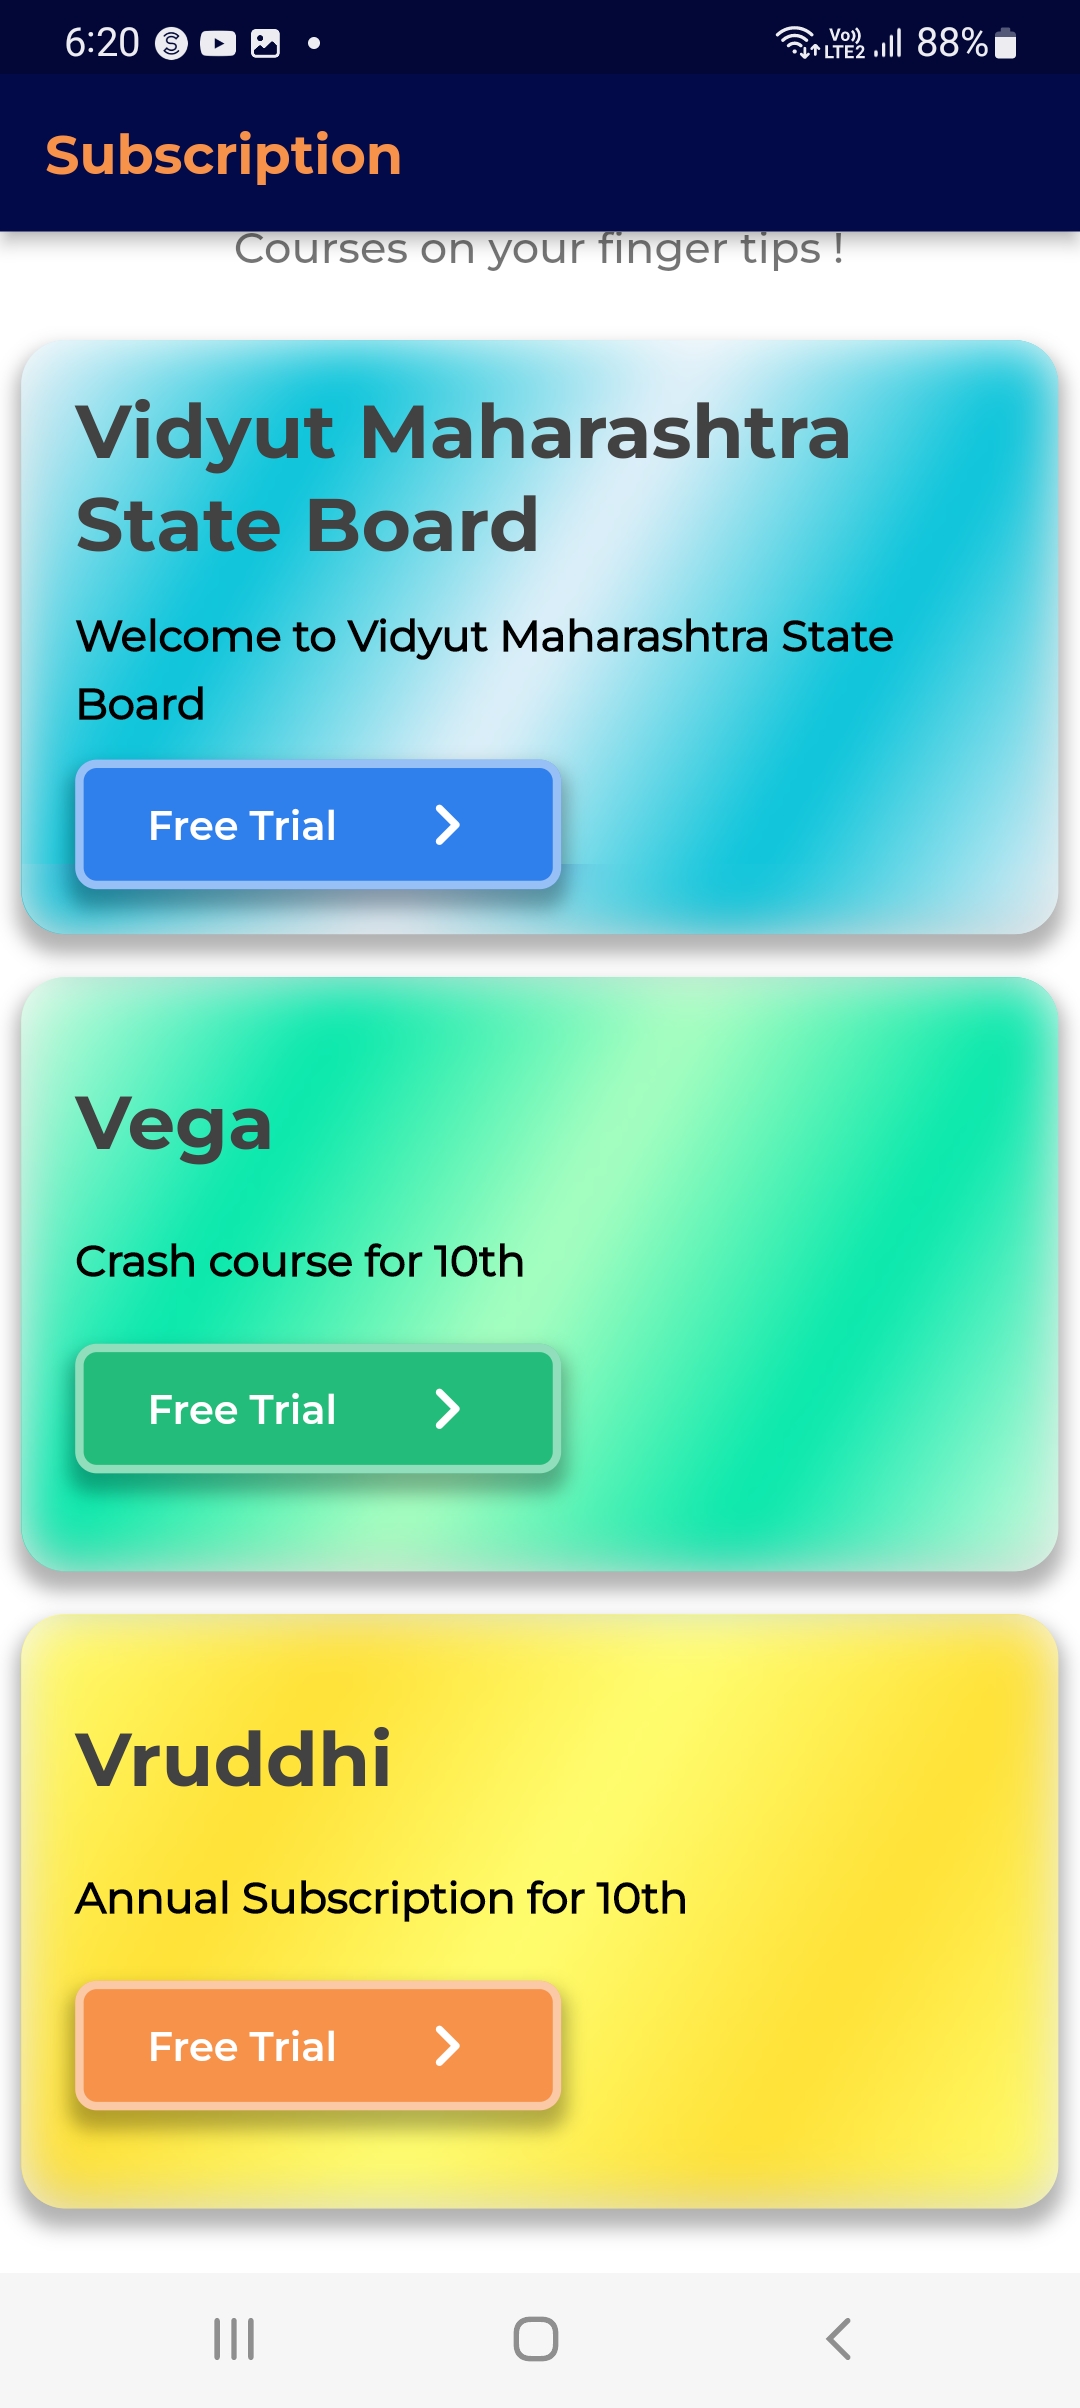 SIN X- JL RIERA |

Subscription

   

ourses on your finger tips’!

Vidyut Maharashtra
State Board

Welcome to Vidyut Maharashtra State
Board

Free Trial &gt;

 

Vega

Crash course for 10th

Vruddhi

Annual Subscription for 10th